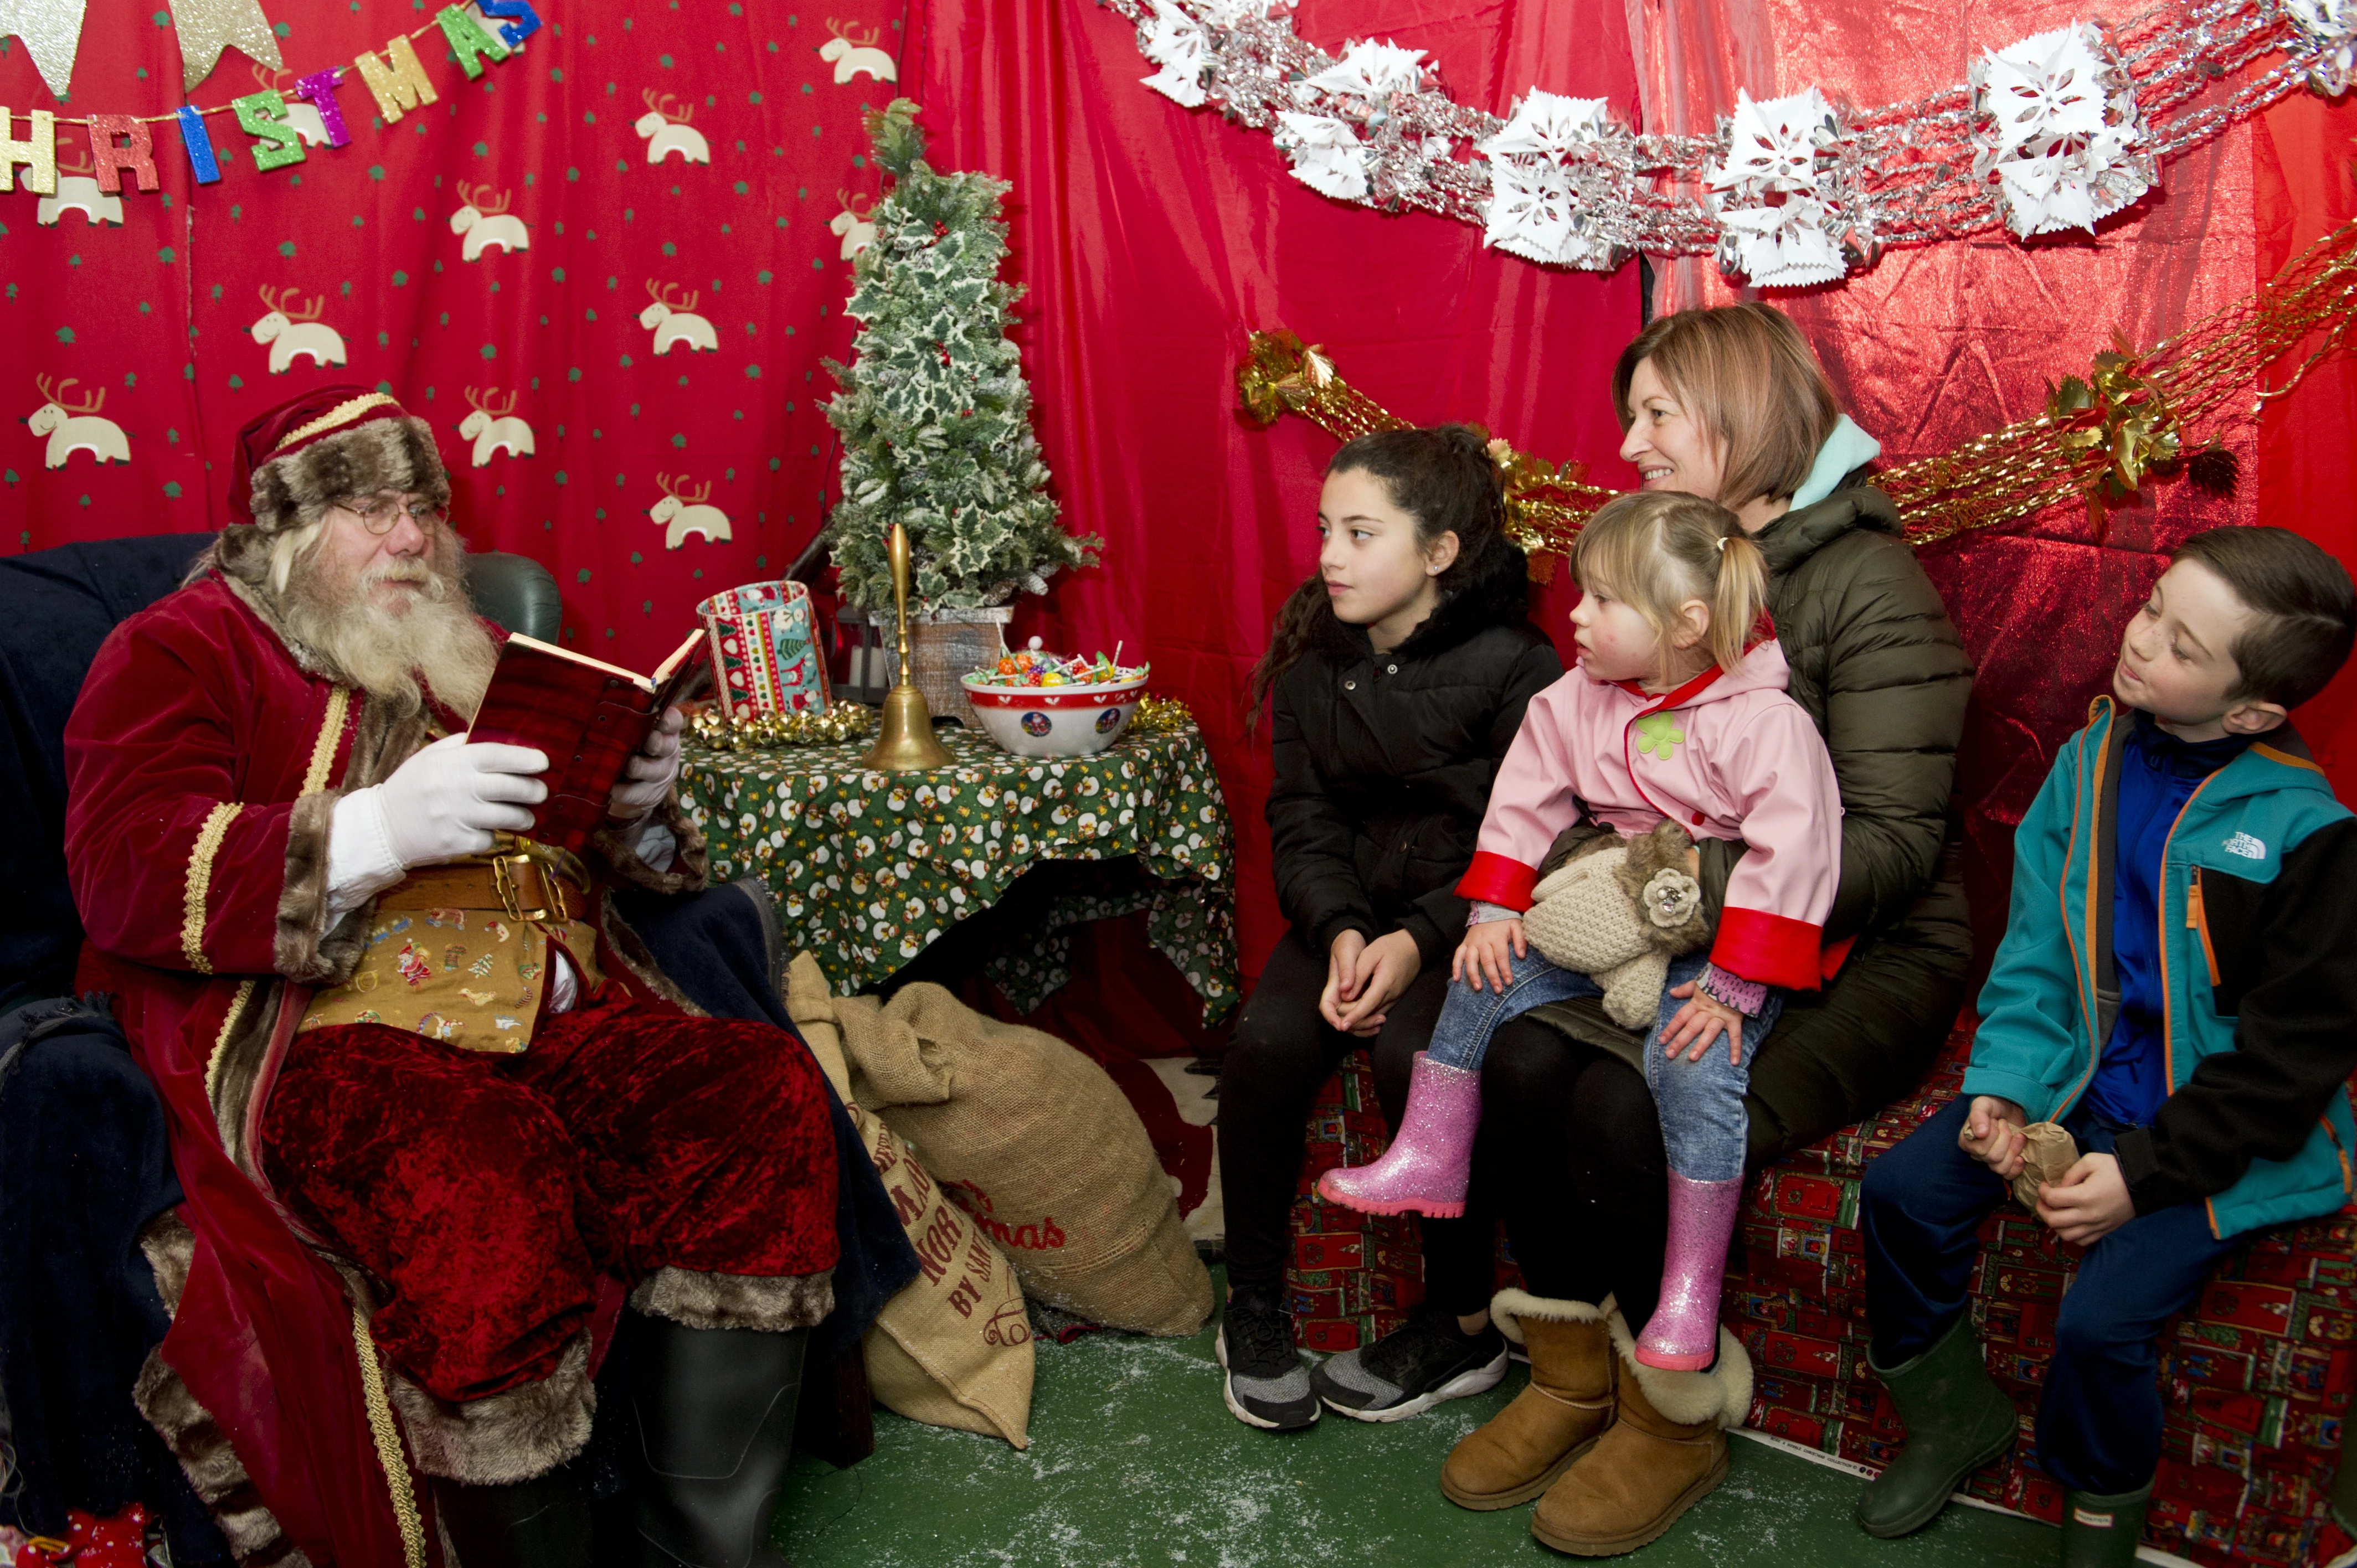 Santa welcomes a family to his grotto